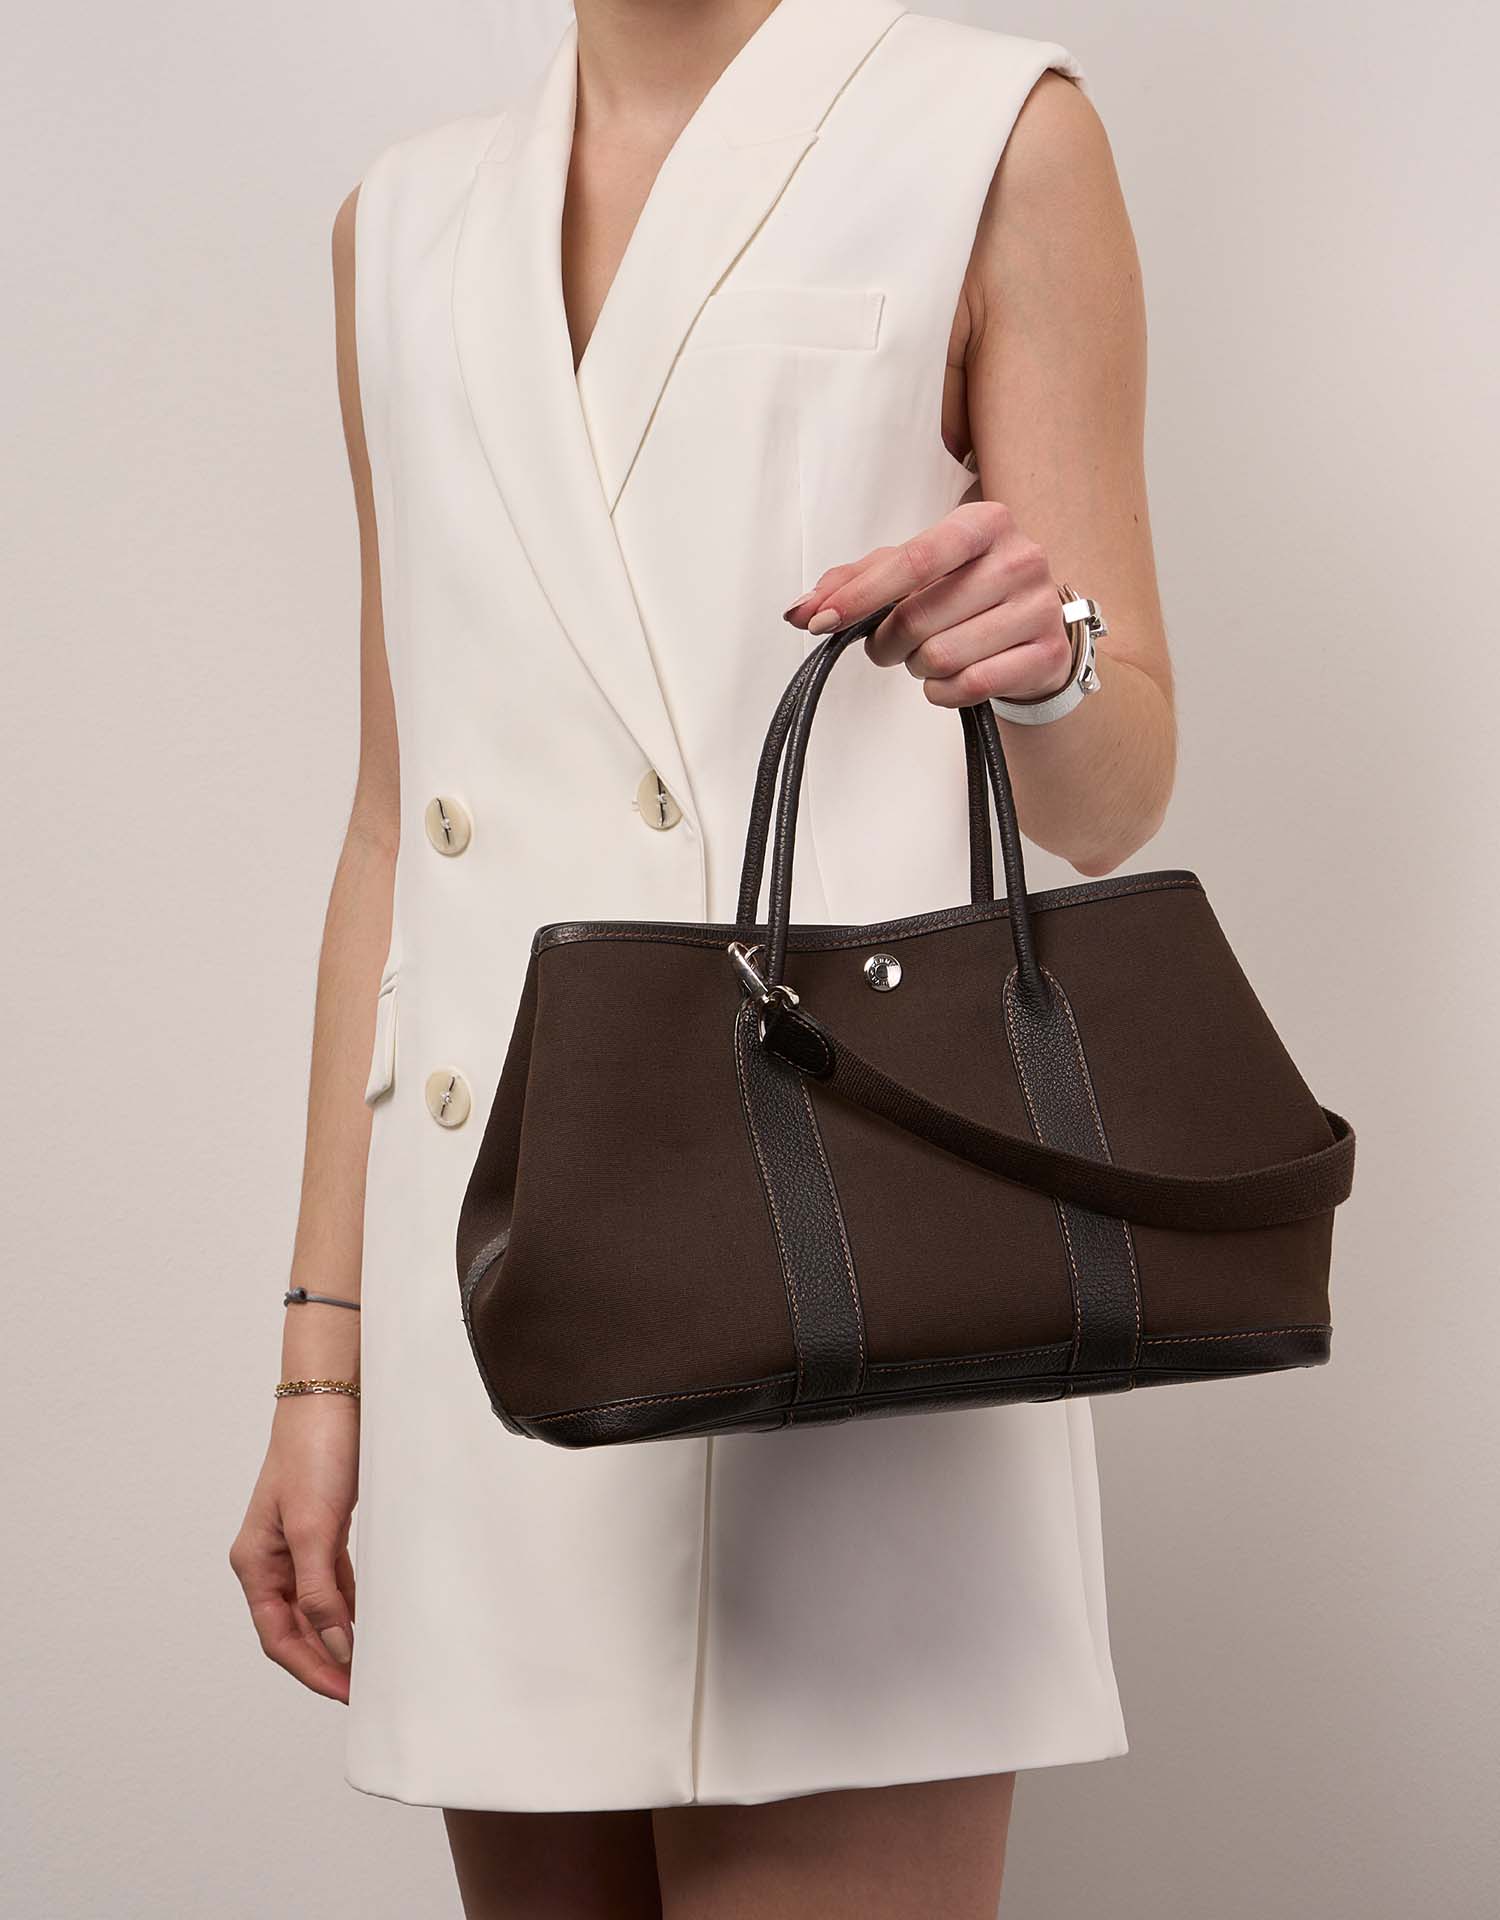 Hermes Garden Party 30, Canvas with Brown Leather and Strap